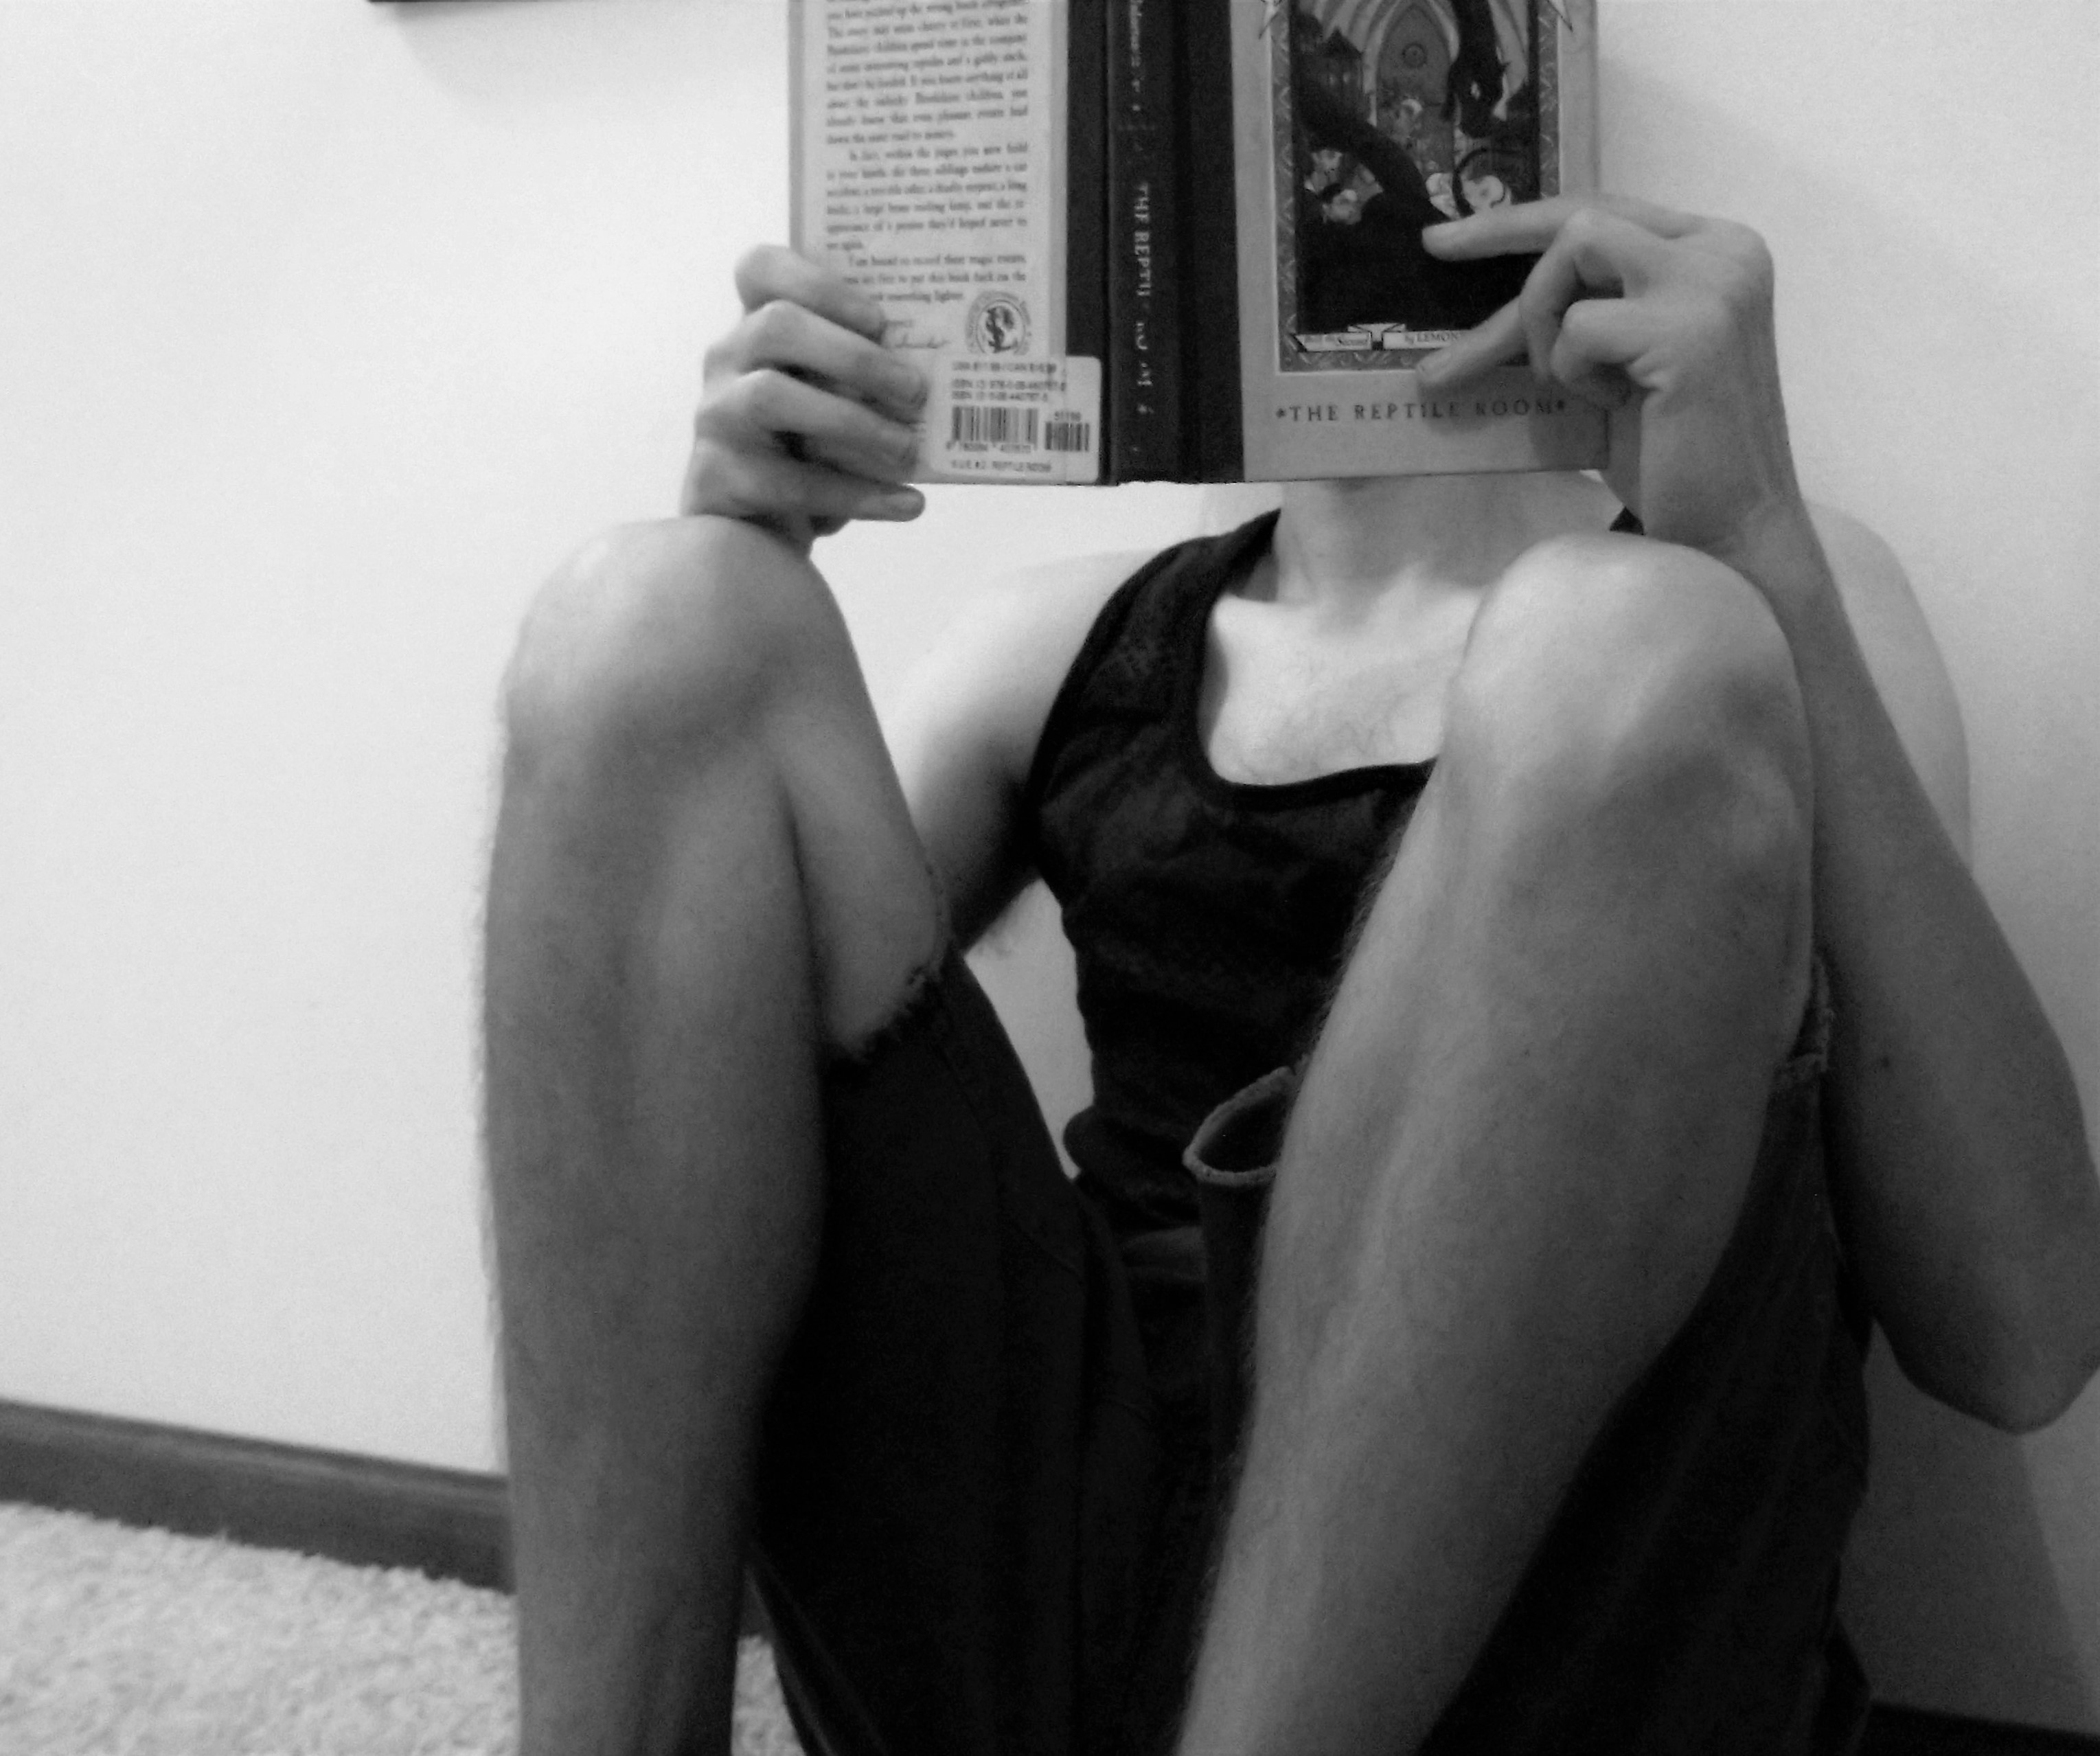 Sitting knees to chest reading photo